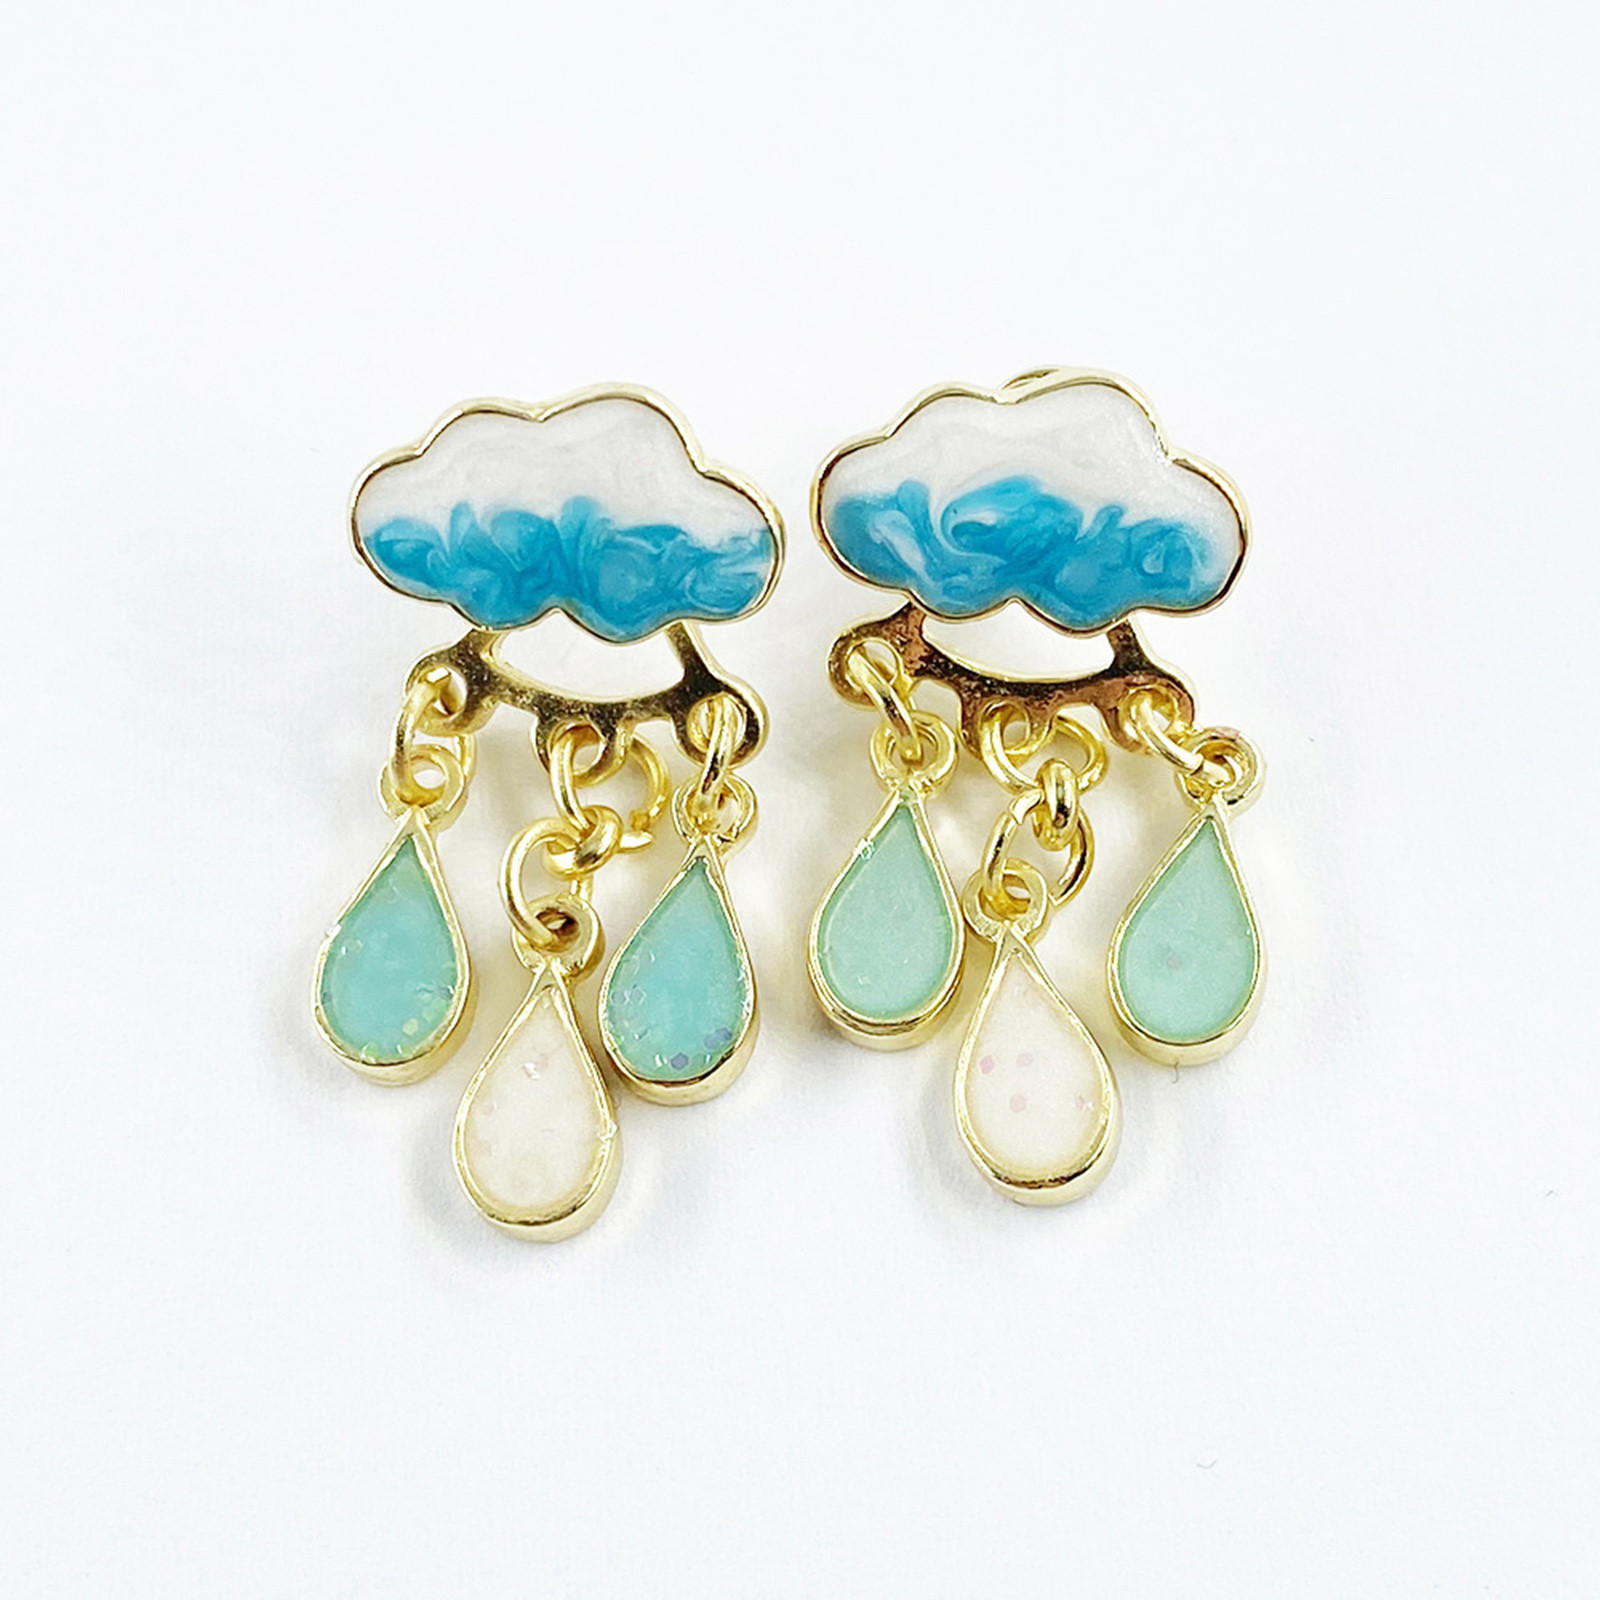 Kayannuo Christmas Clearance Rainy Day Cloud Earrings Cloud Rain Earrings Stud Earrings Advanced Cute Fresh Water Drop Earrings Jewelry Gifts For Women - image 1 of 6